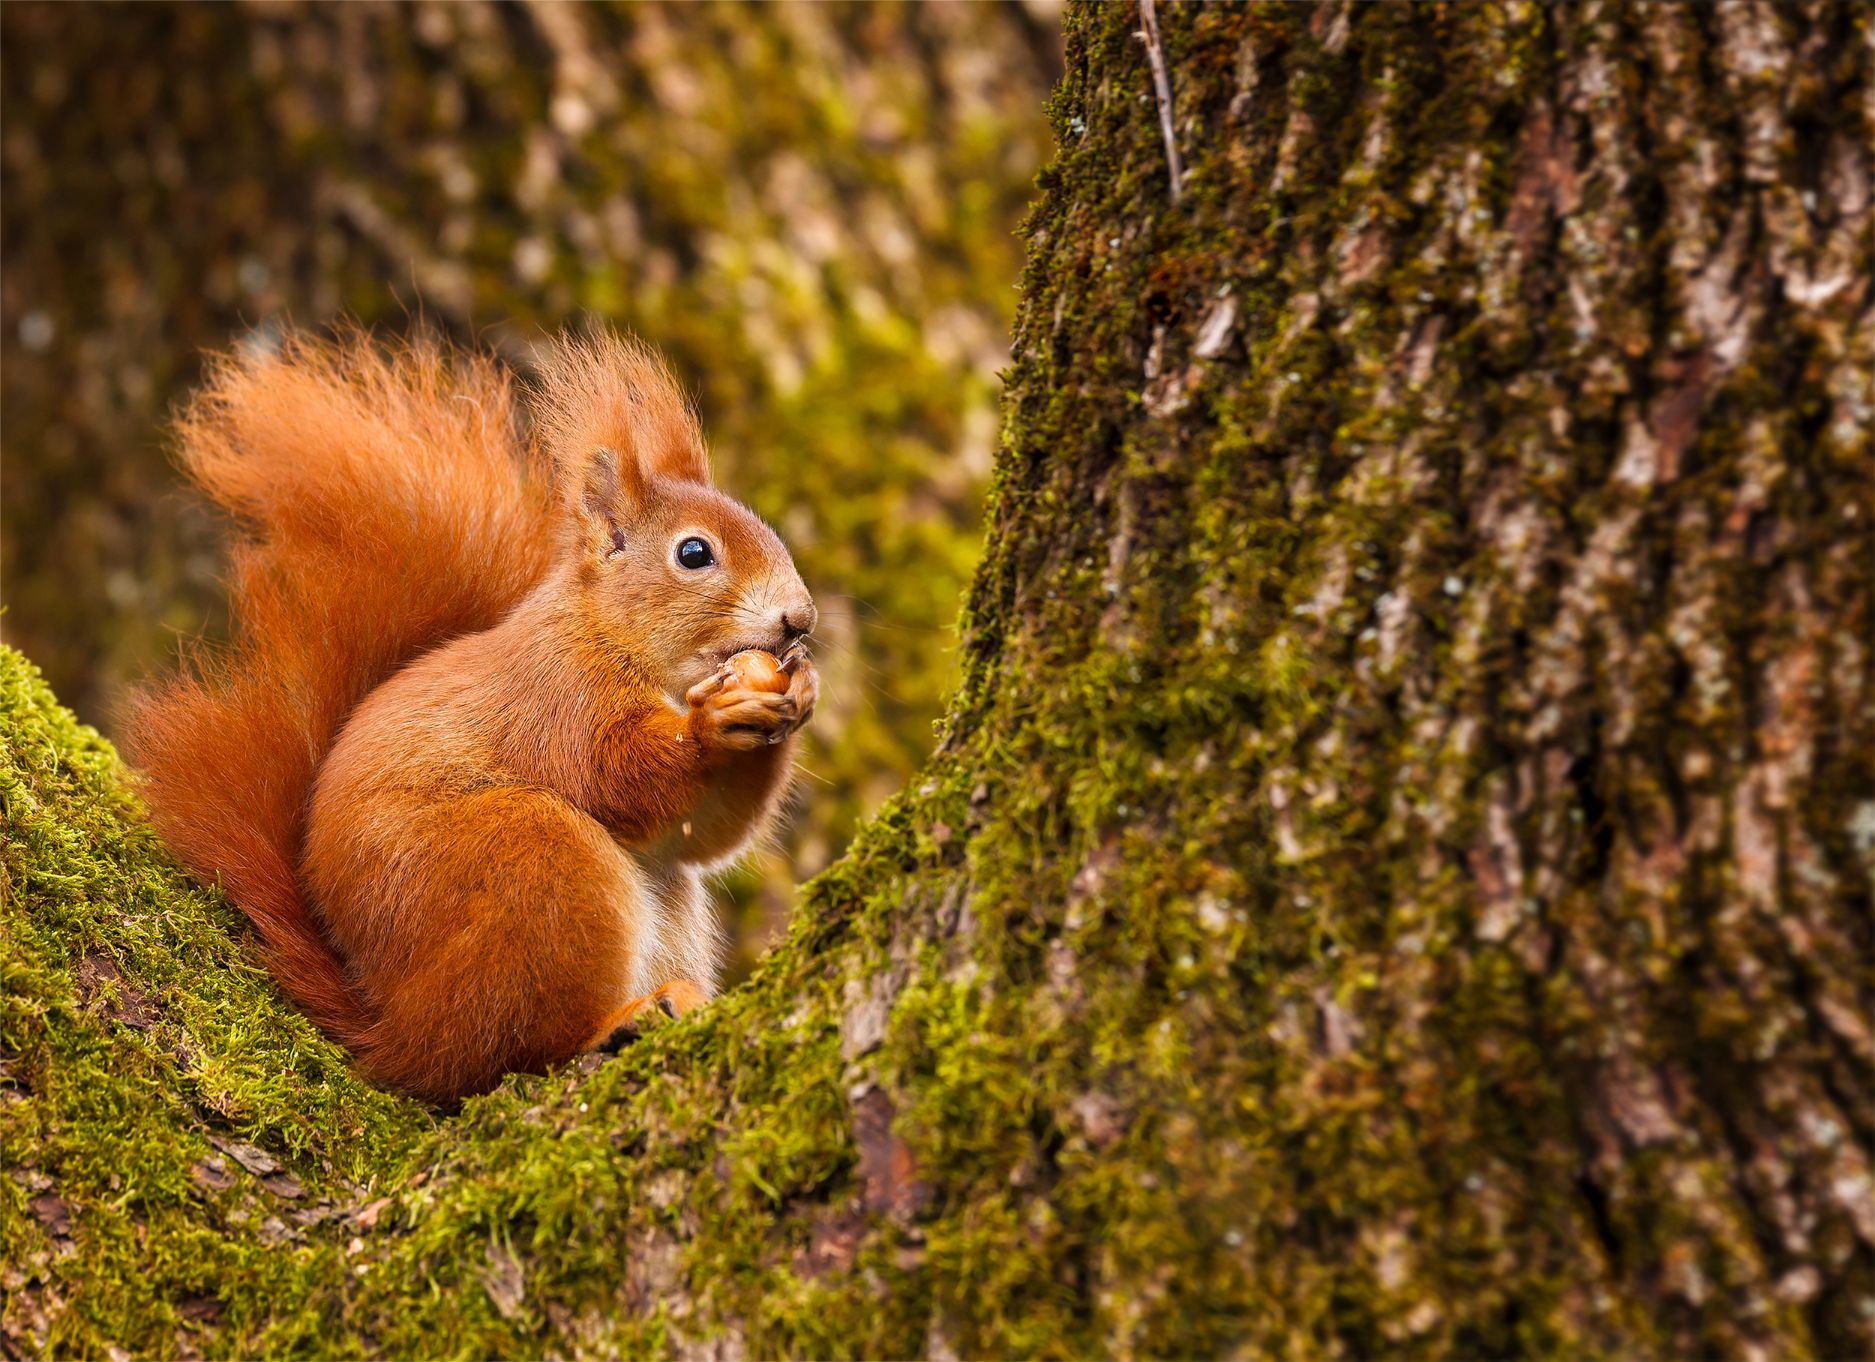 A red squirrel eating a nut.